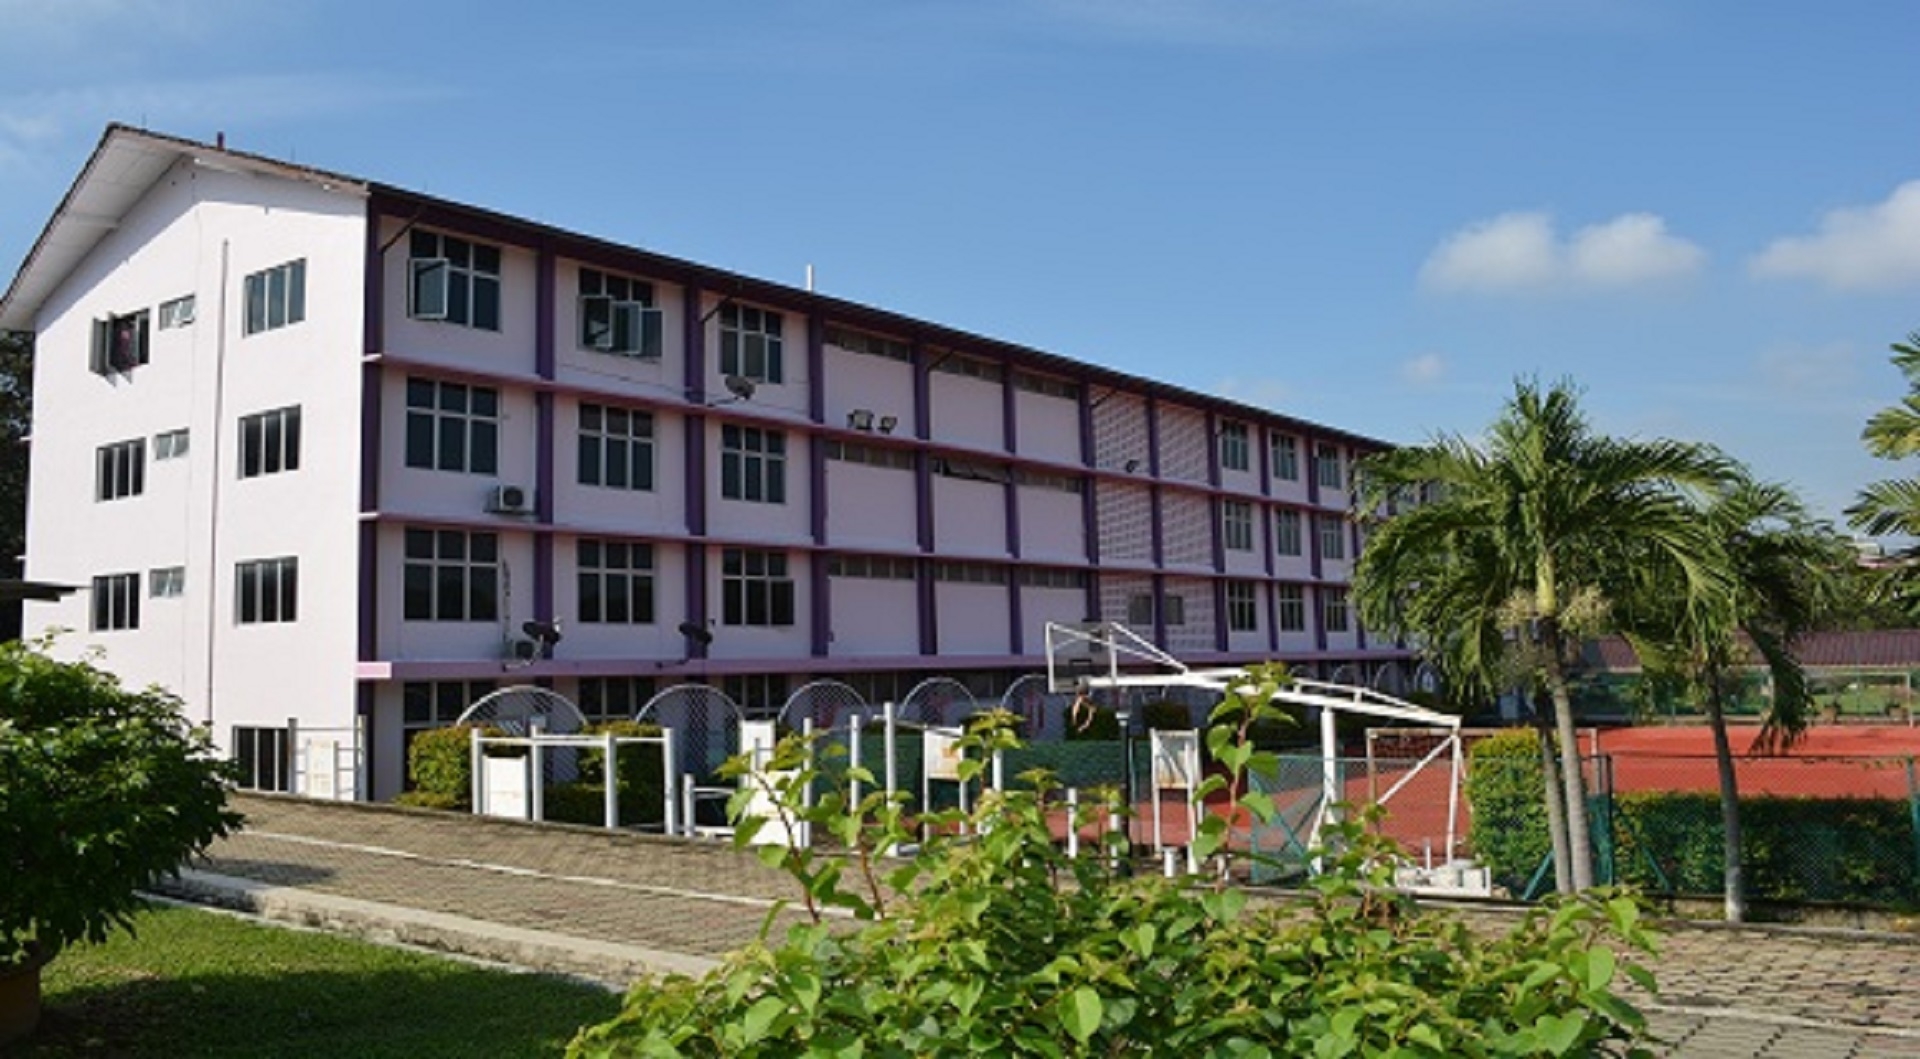 Recreational facilities was provided for students to do relaxing